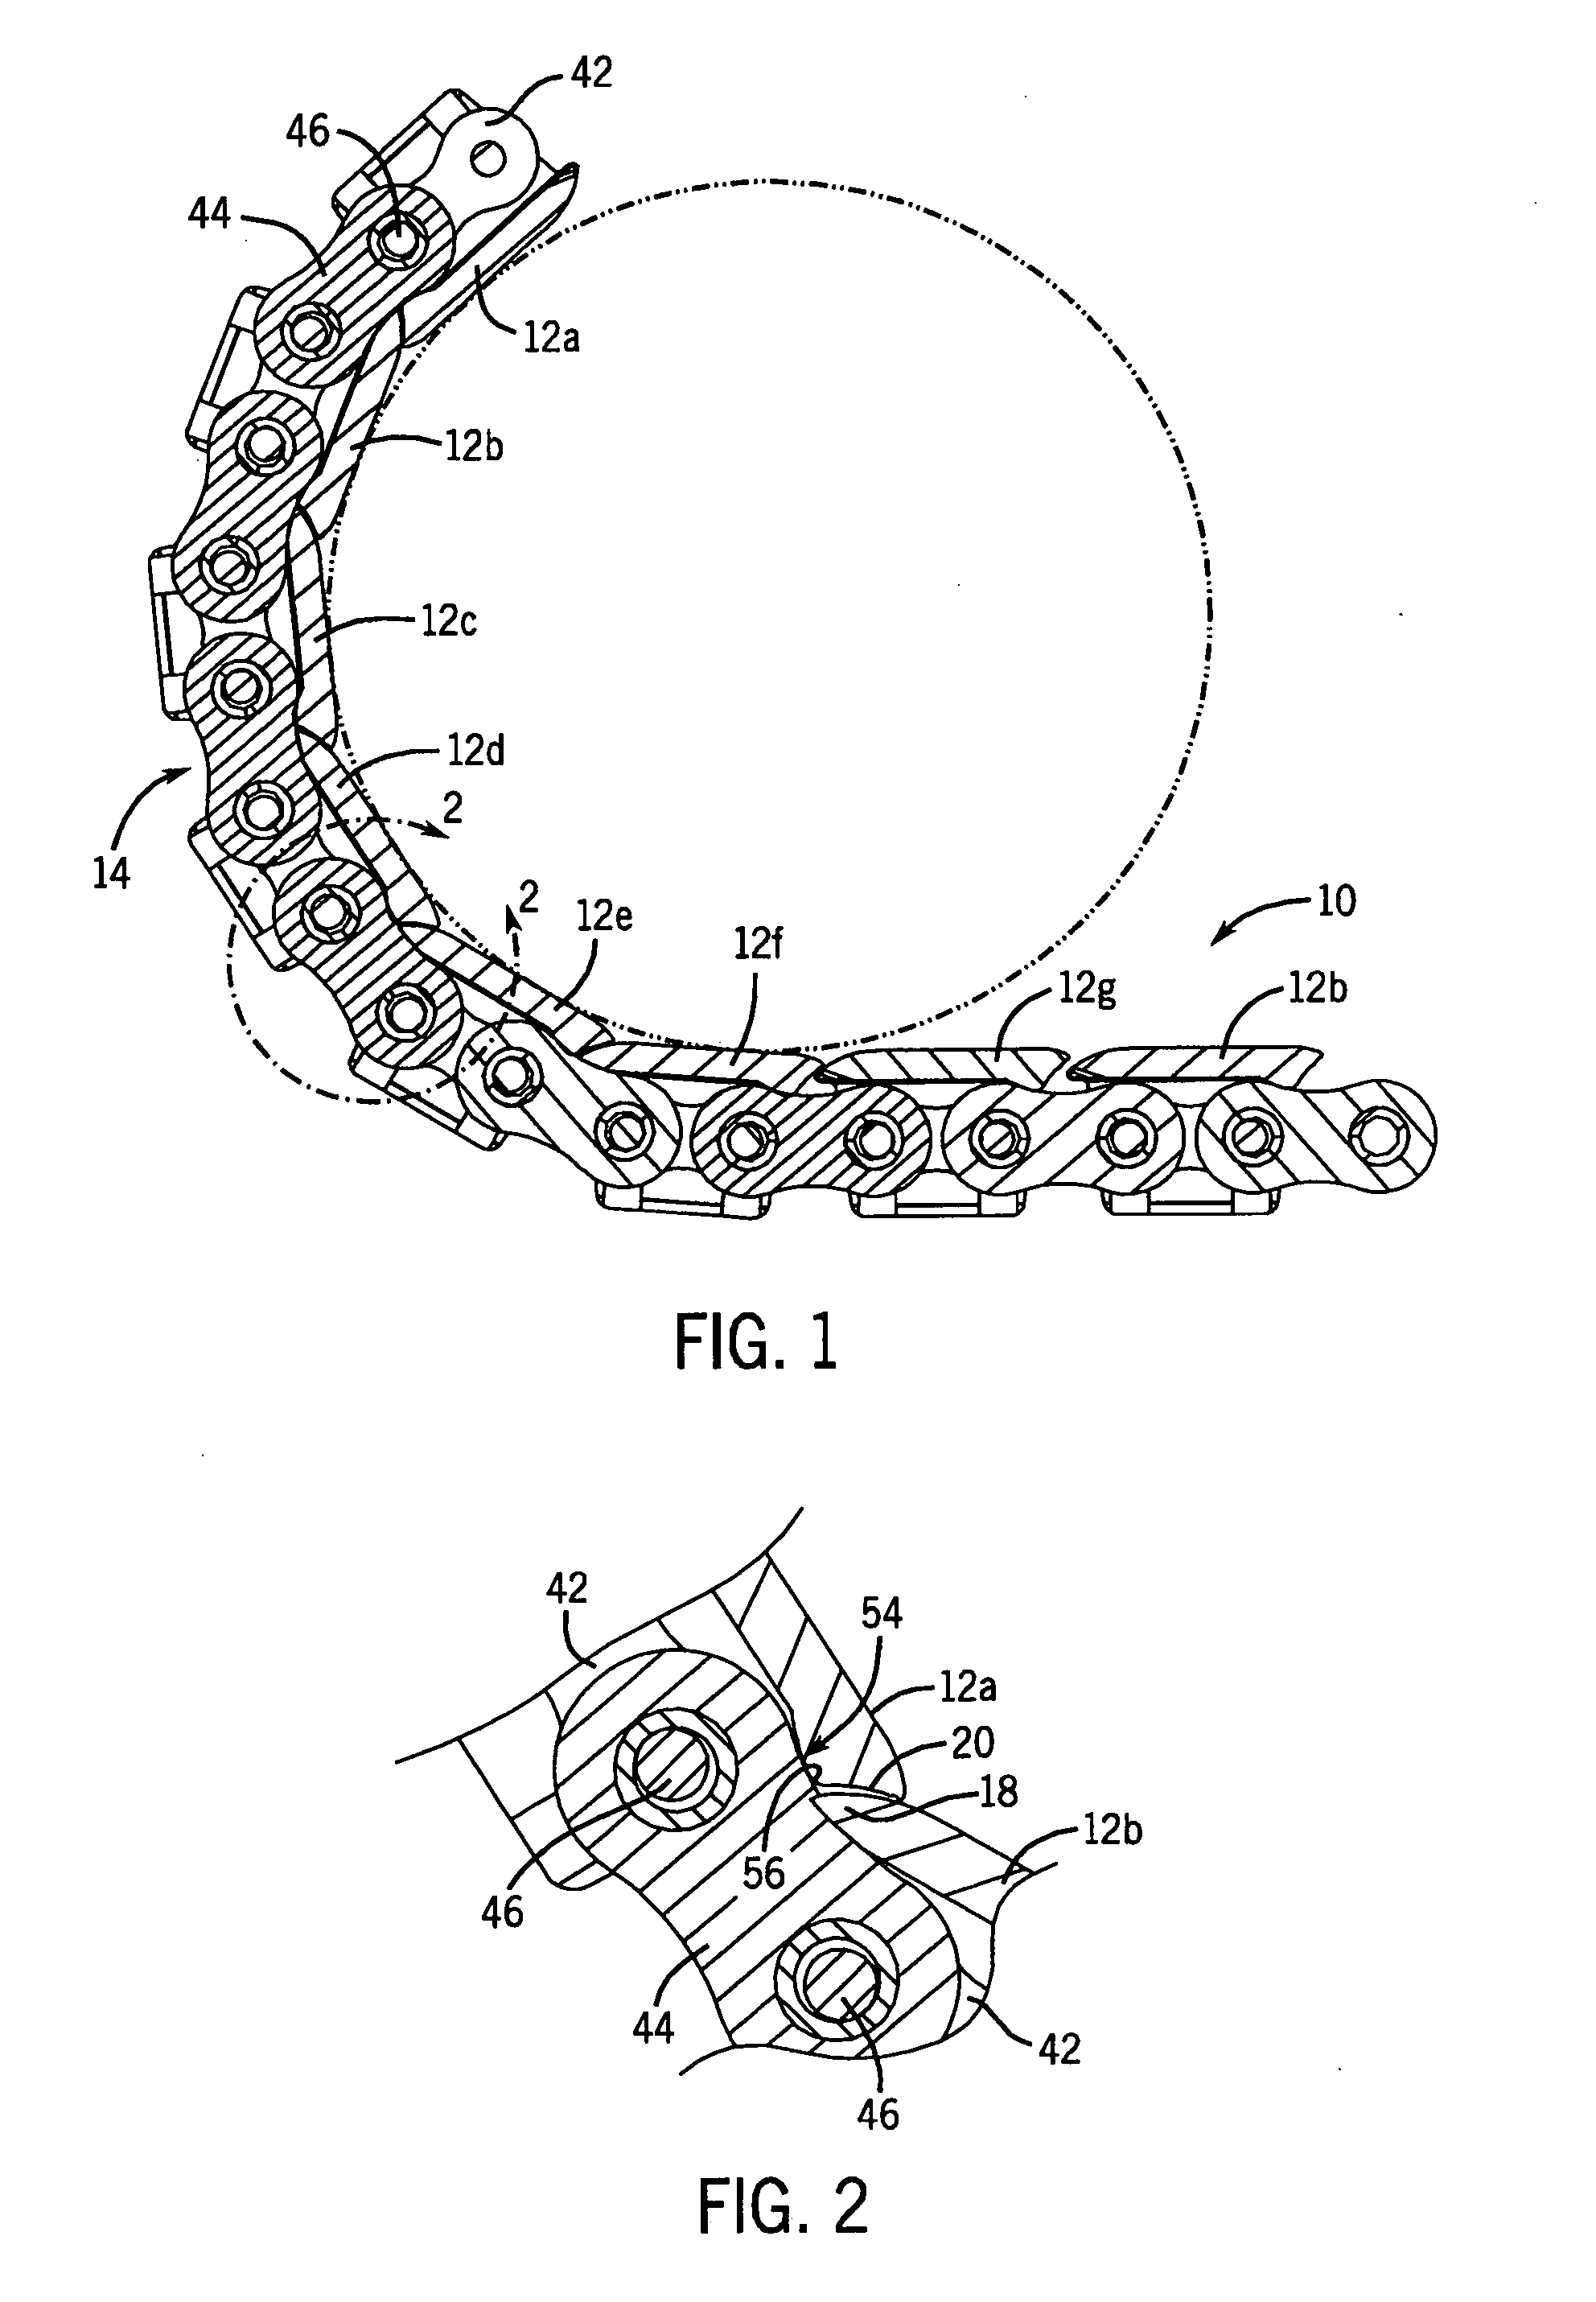 Anti-shingling product conveying chain